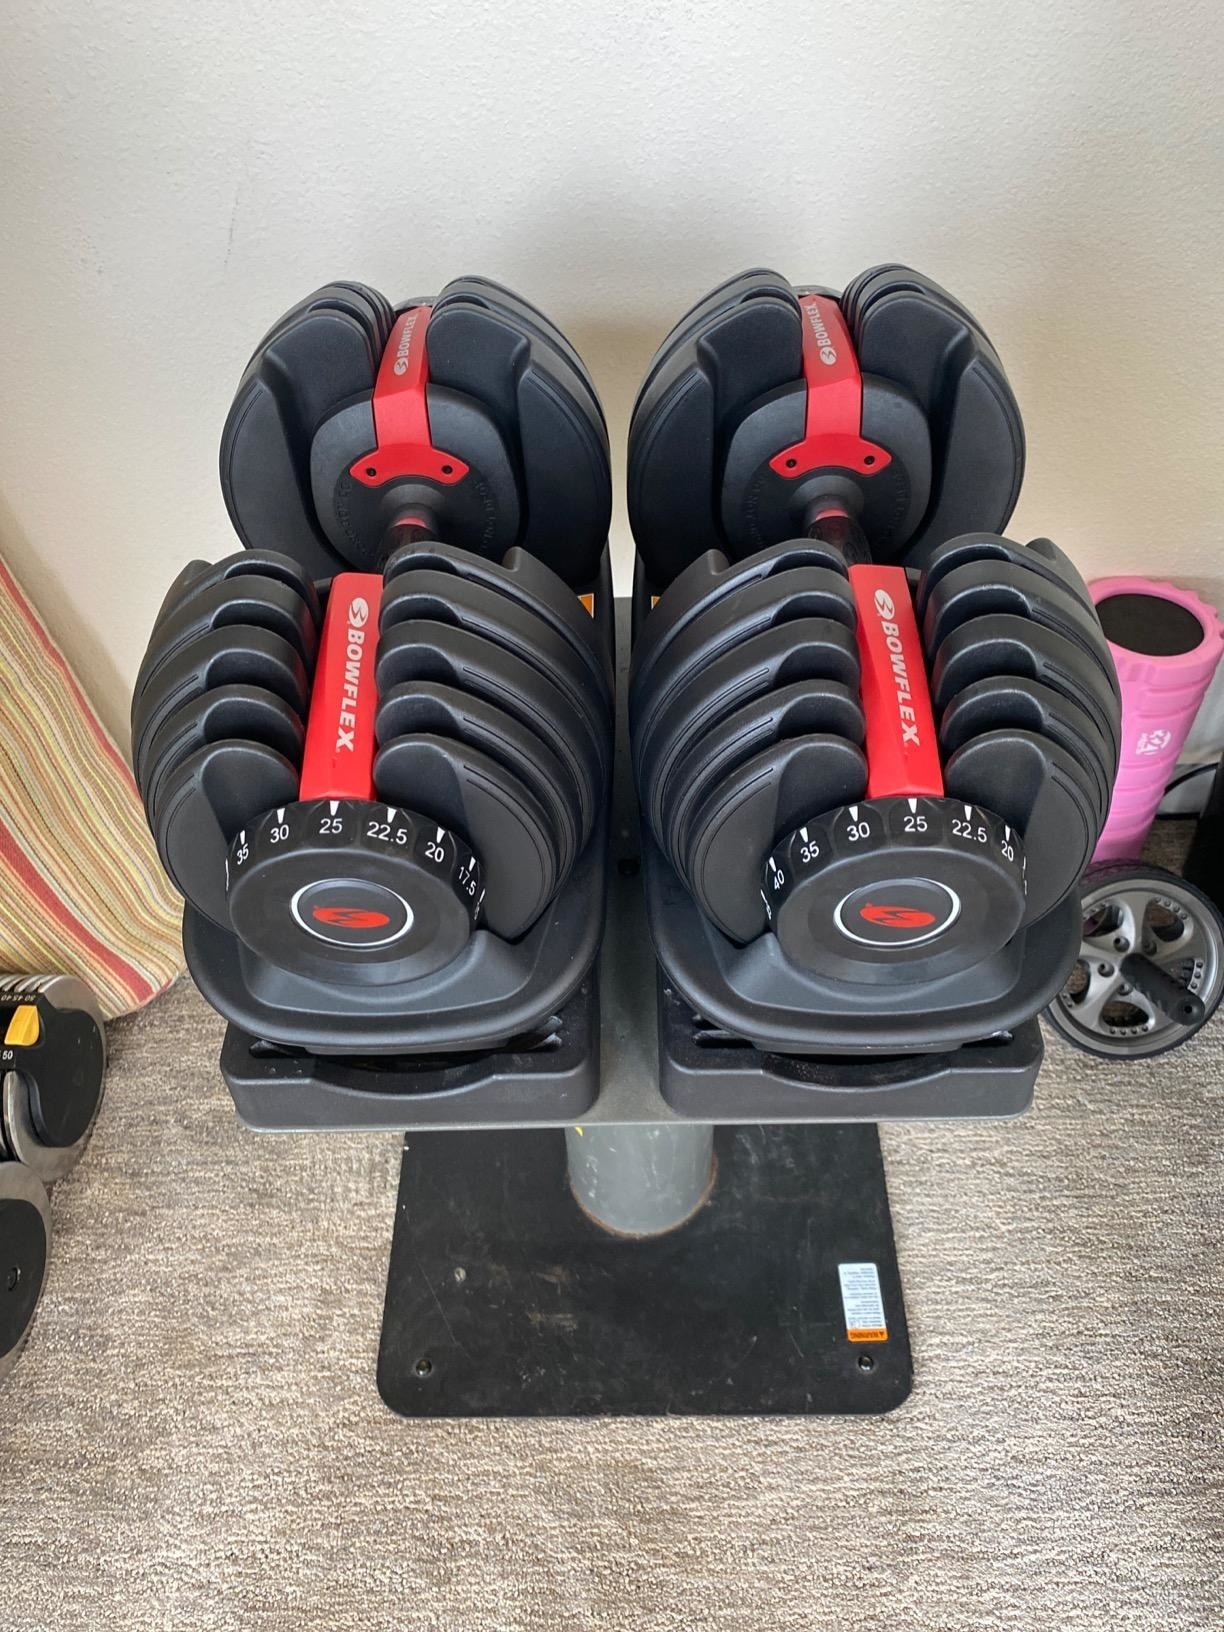 t6he set of adjustable dumbbells in their holding stand